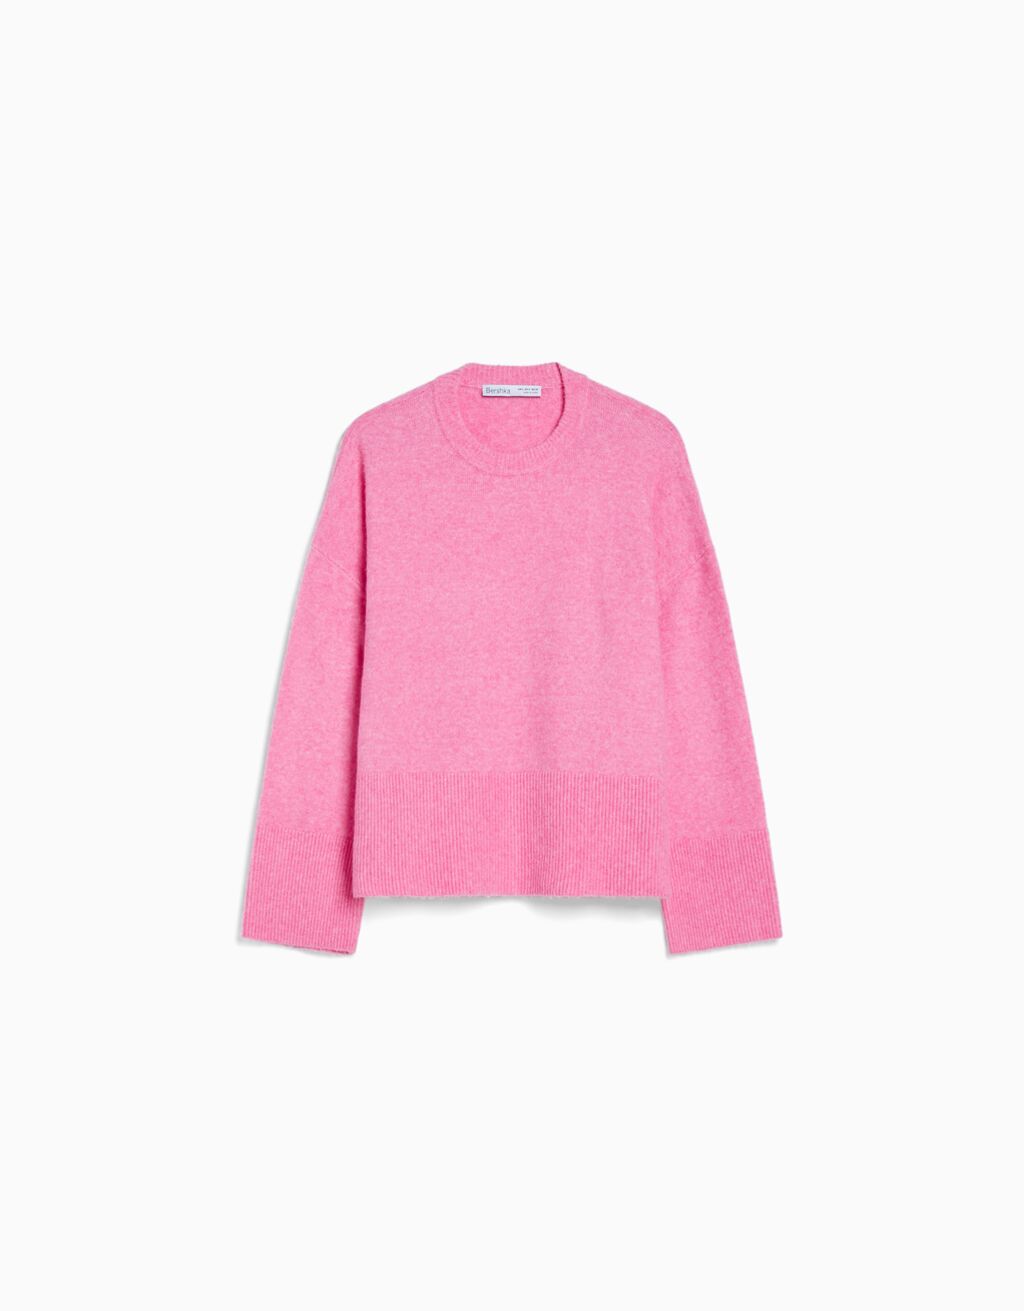 Women’s Sweaters and Knitwear | New Collection | Bershka